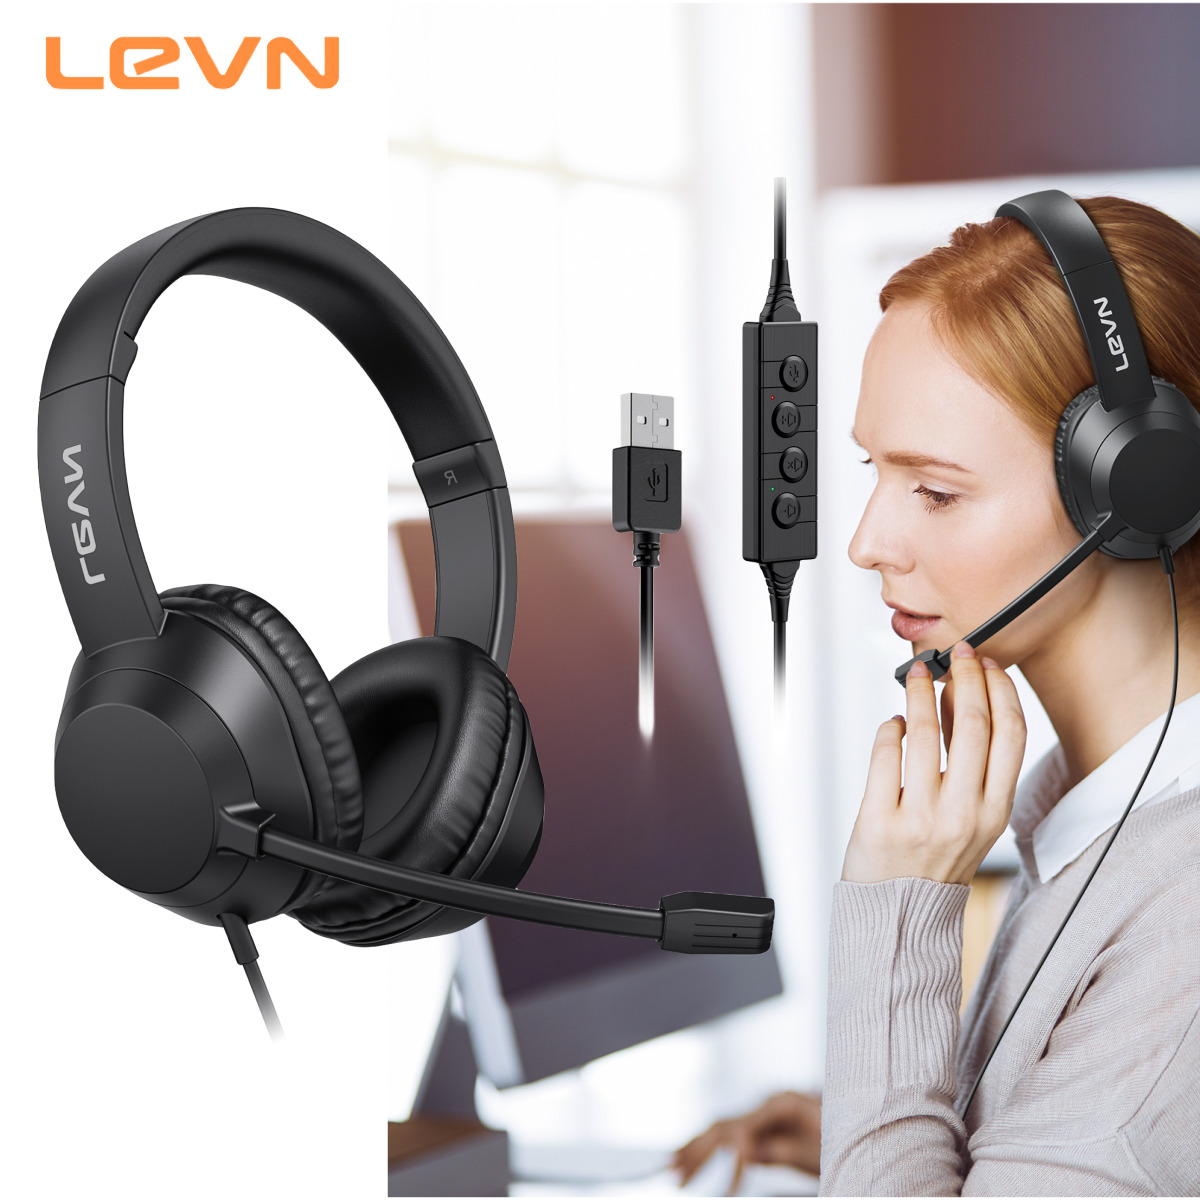 LEVN Wired Headset, USB Headset with Mic & Noise Cancelling, Computer Headset